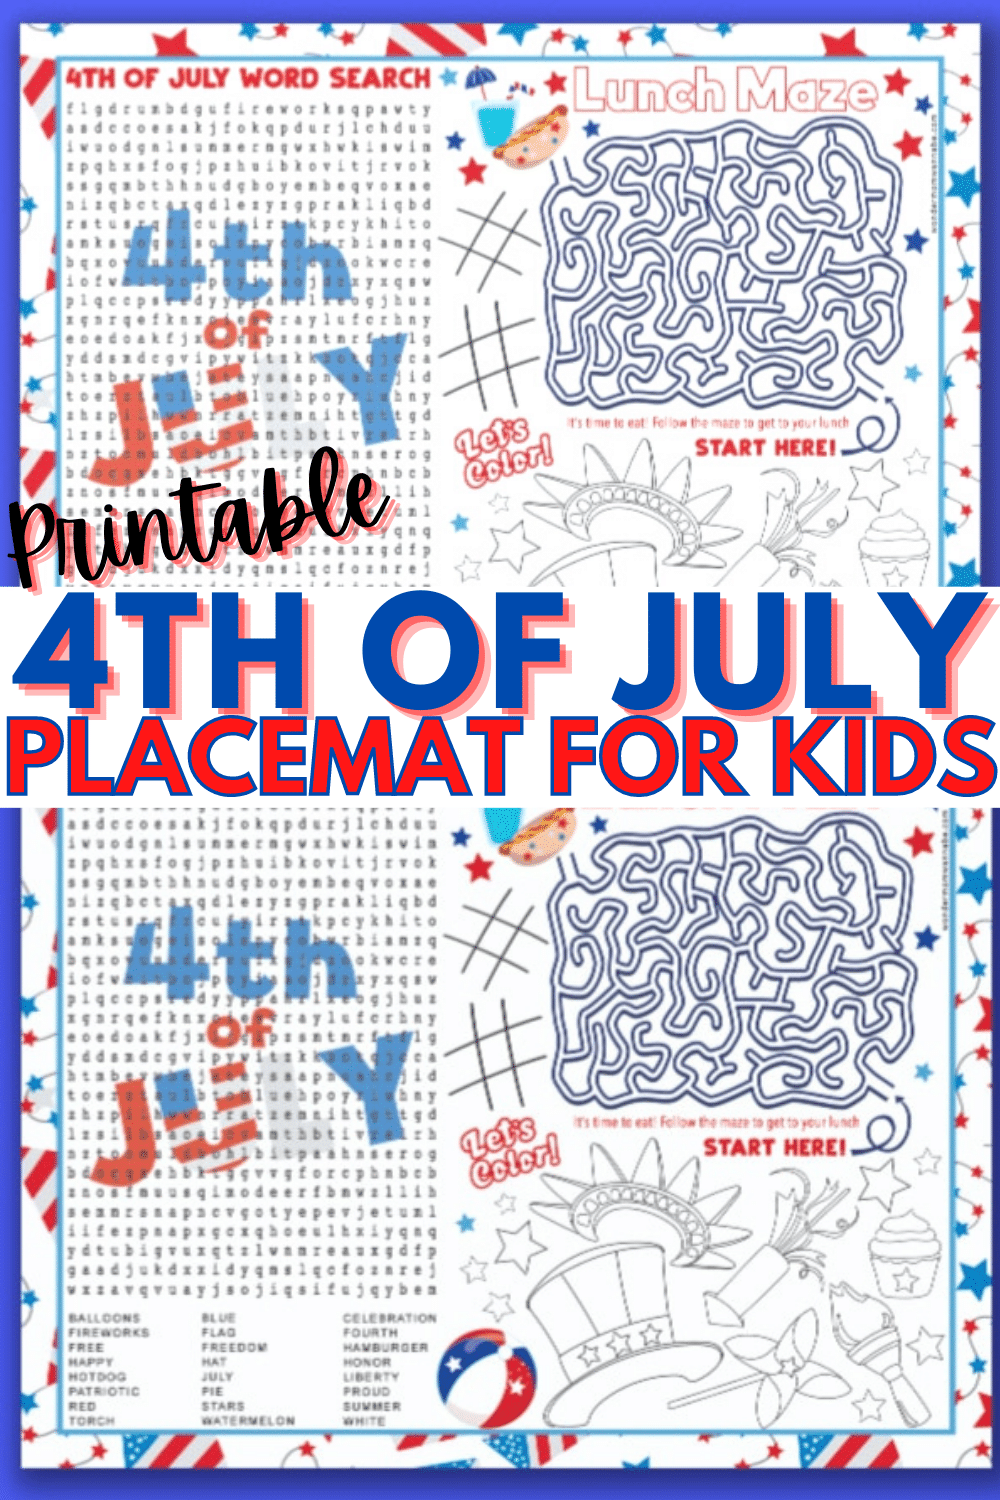 This printable 4th of July placemat for kids is patriotic and fun. A placemat with a word search, maze and coloring area, this will keep kids busy at meals. #printables #4thofJuly #placemats via @wondermomwannab